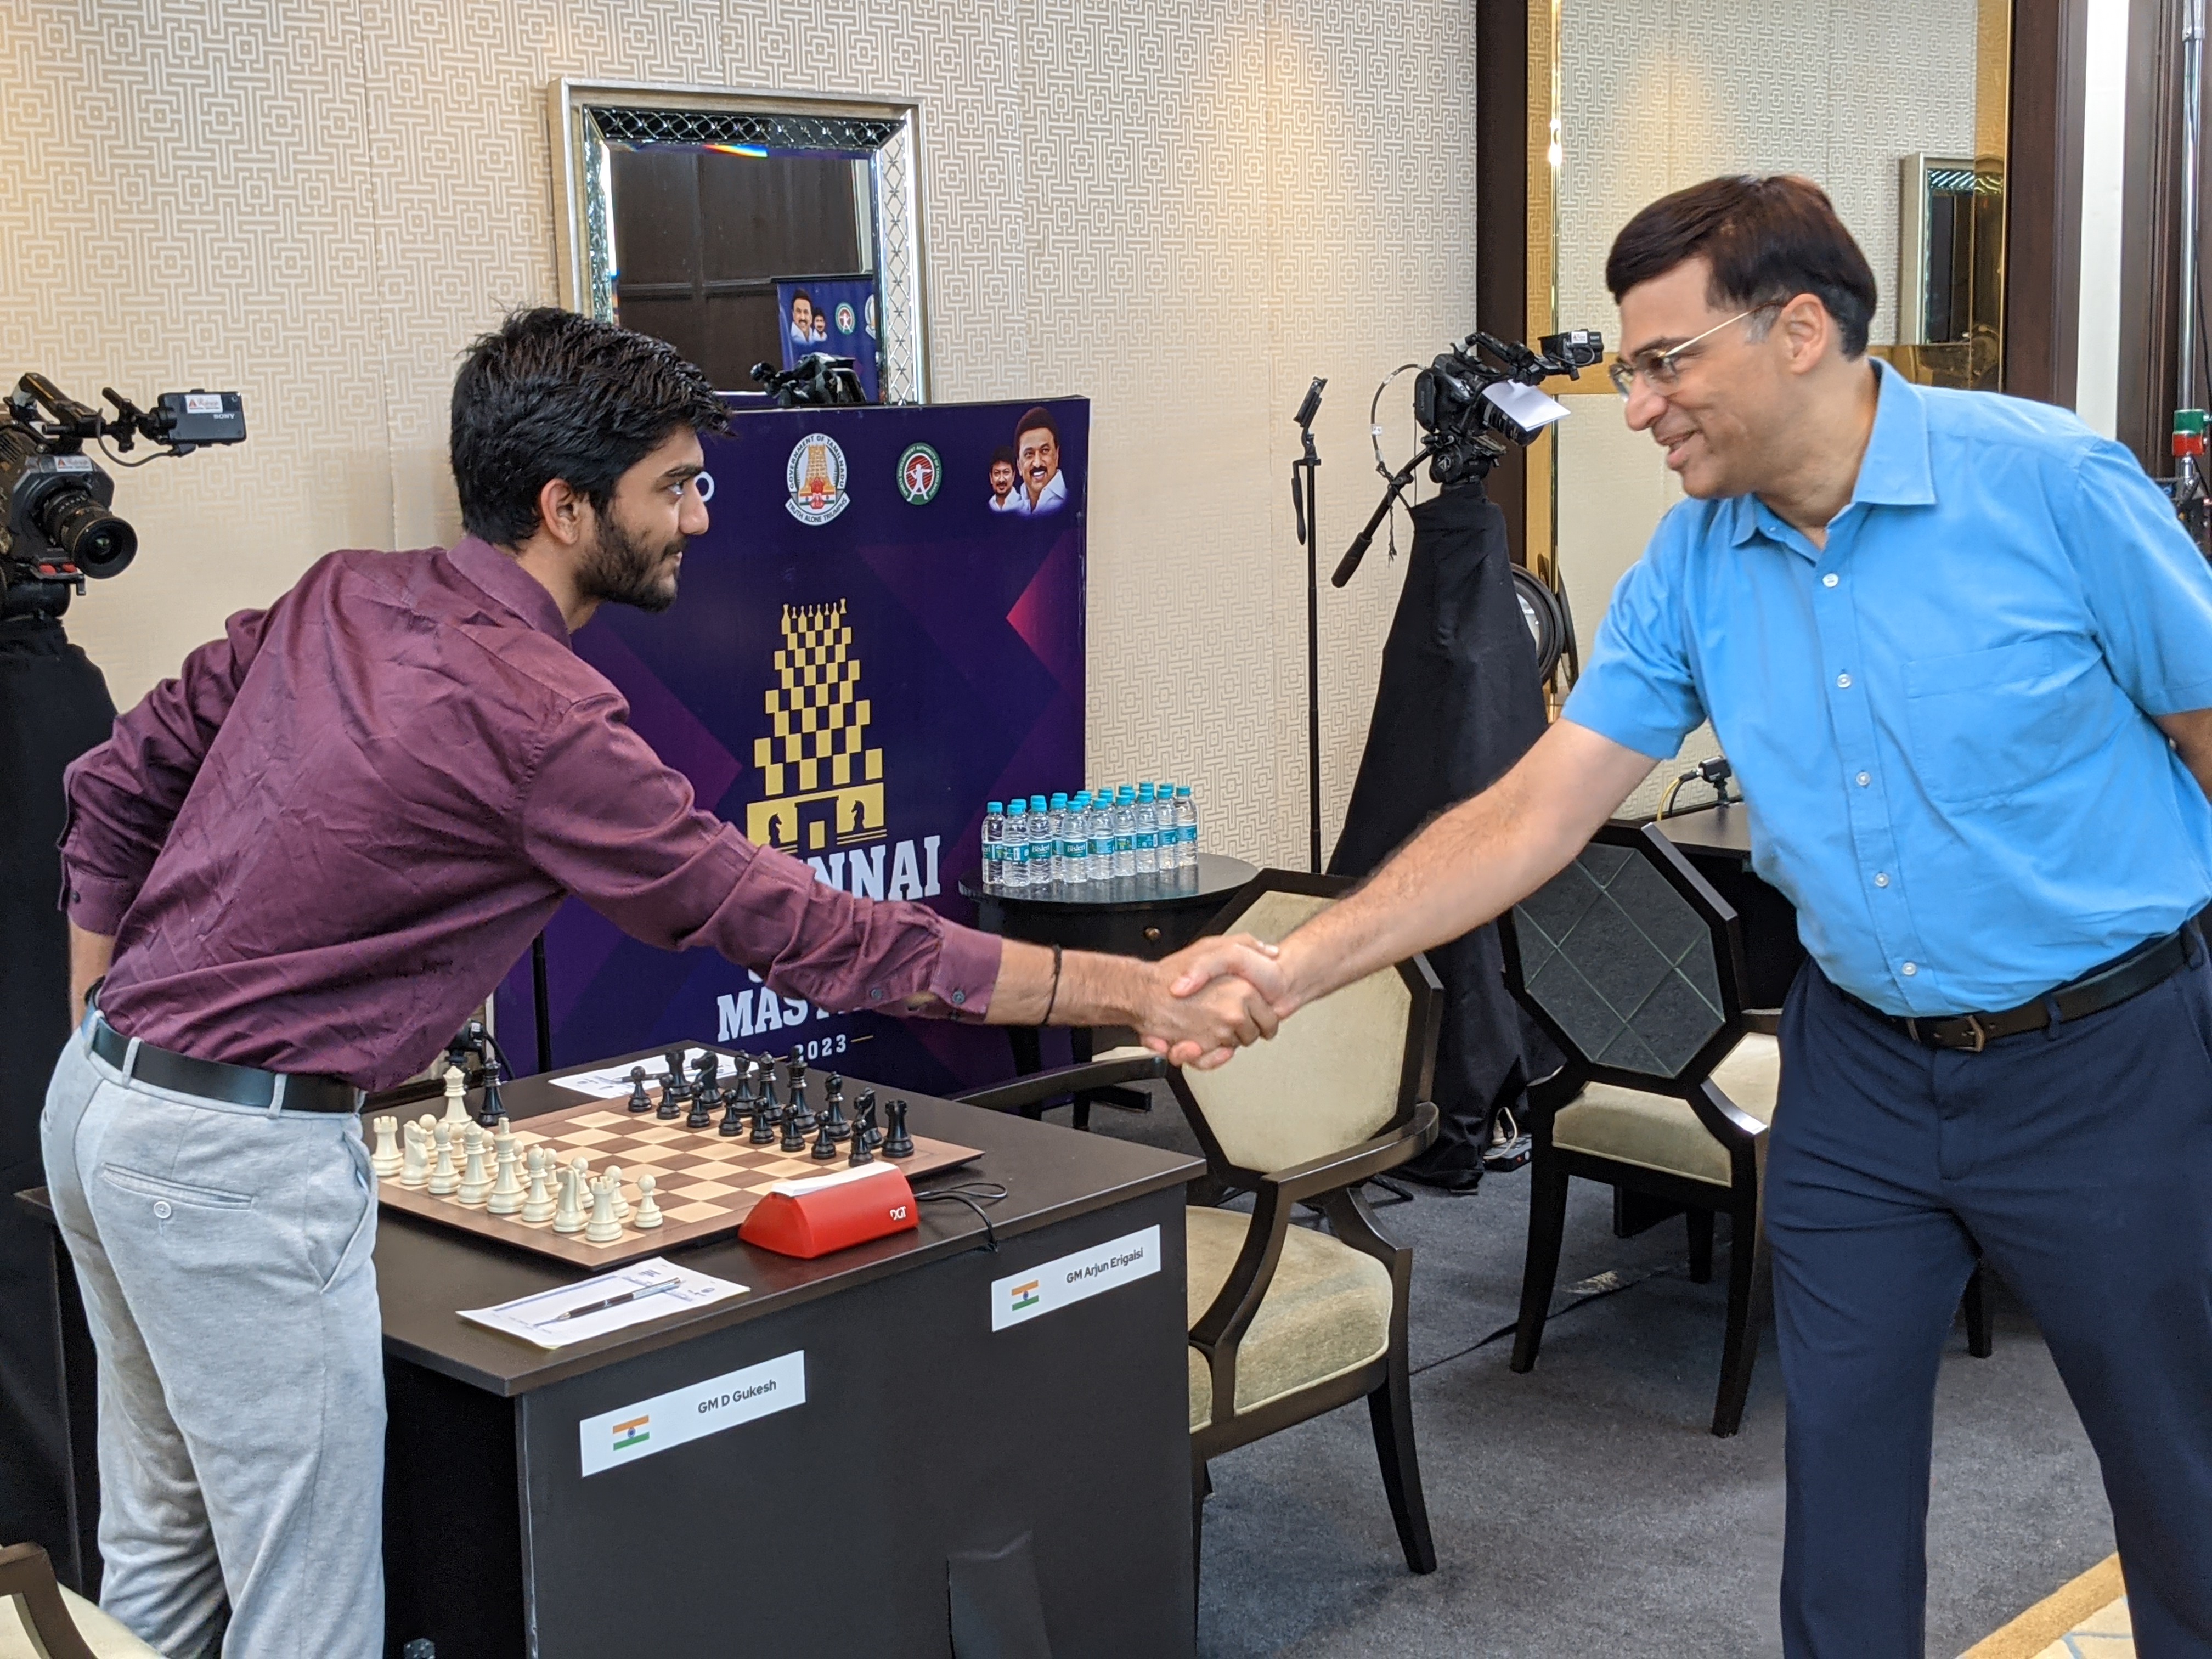 ChessBase India on X: From being 2478 in Dec 2020, he raced to